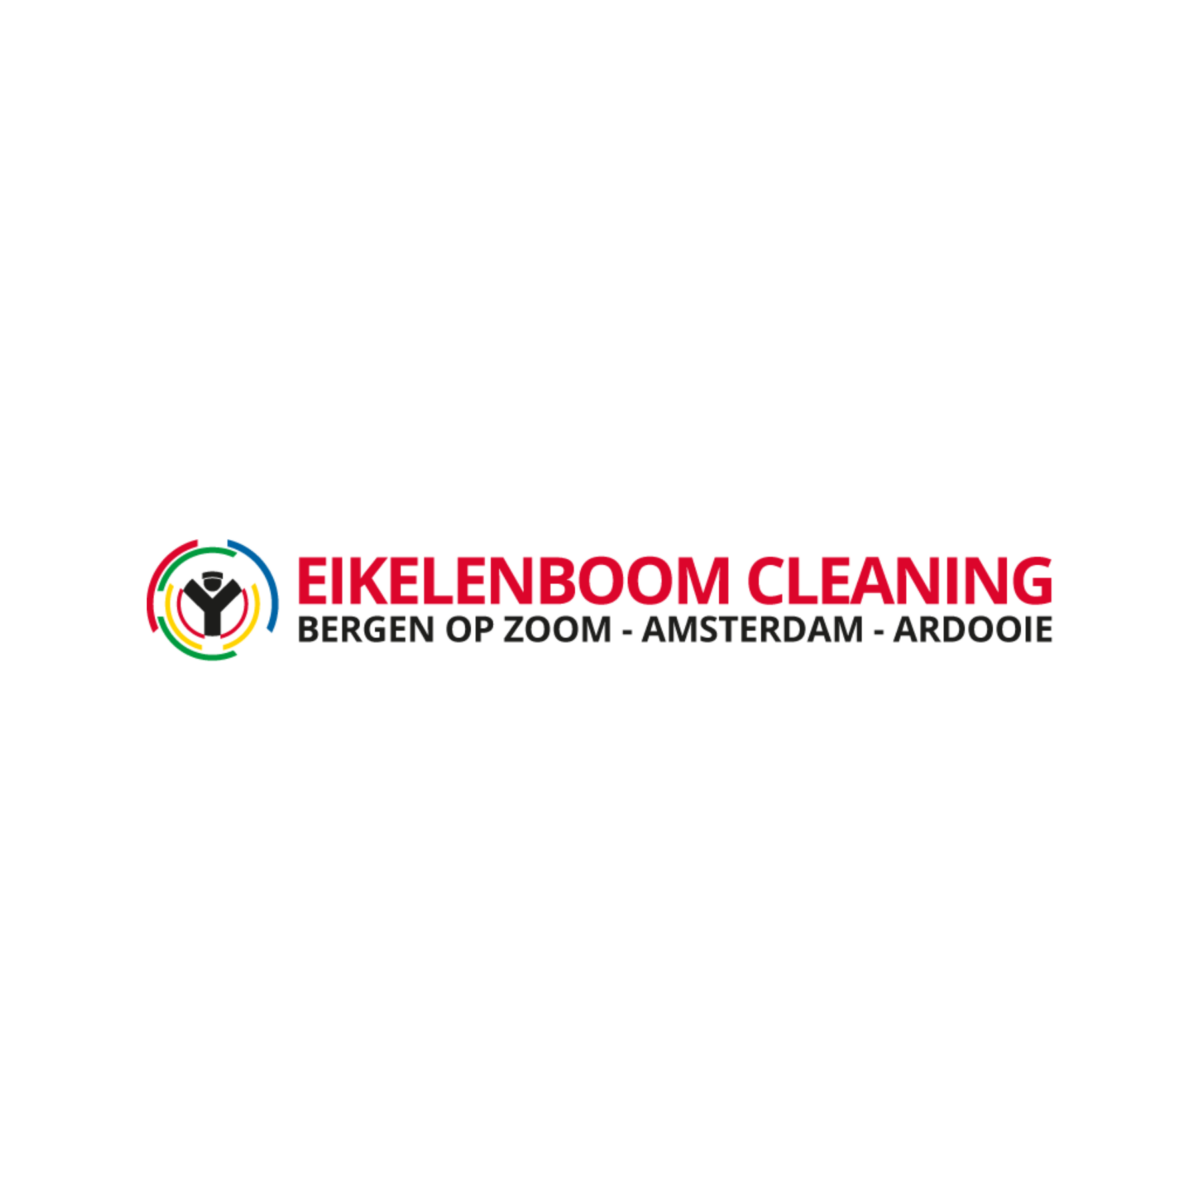 Eikelenboom Cleaning